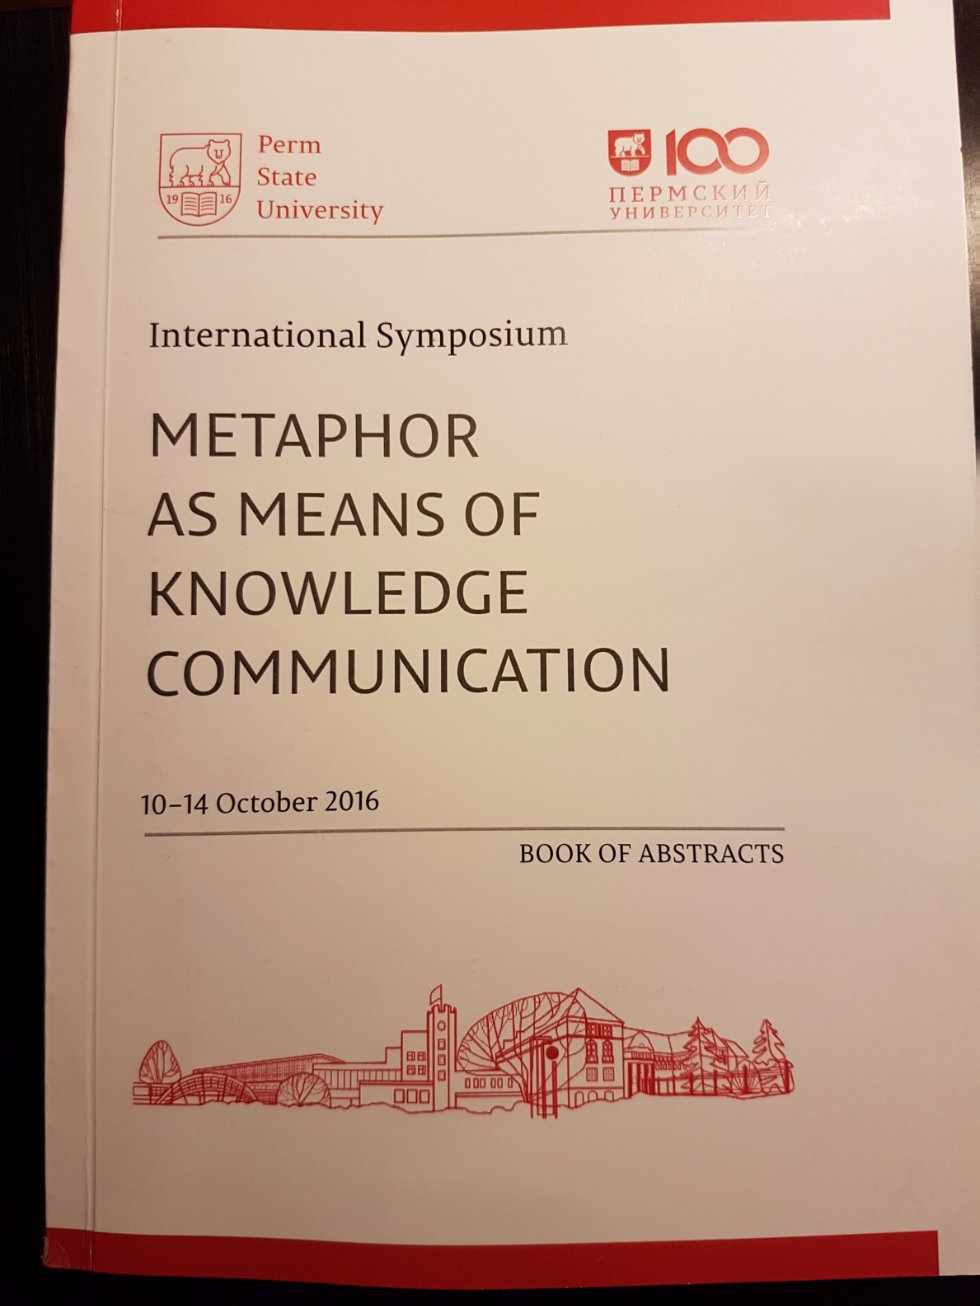           'Metaphor as means of knowledge communication'